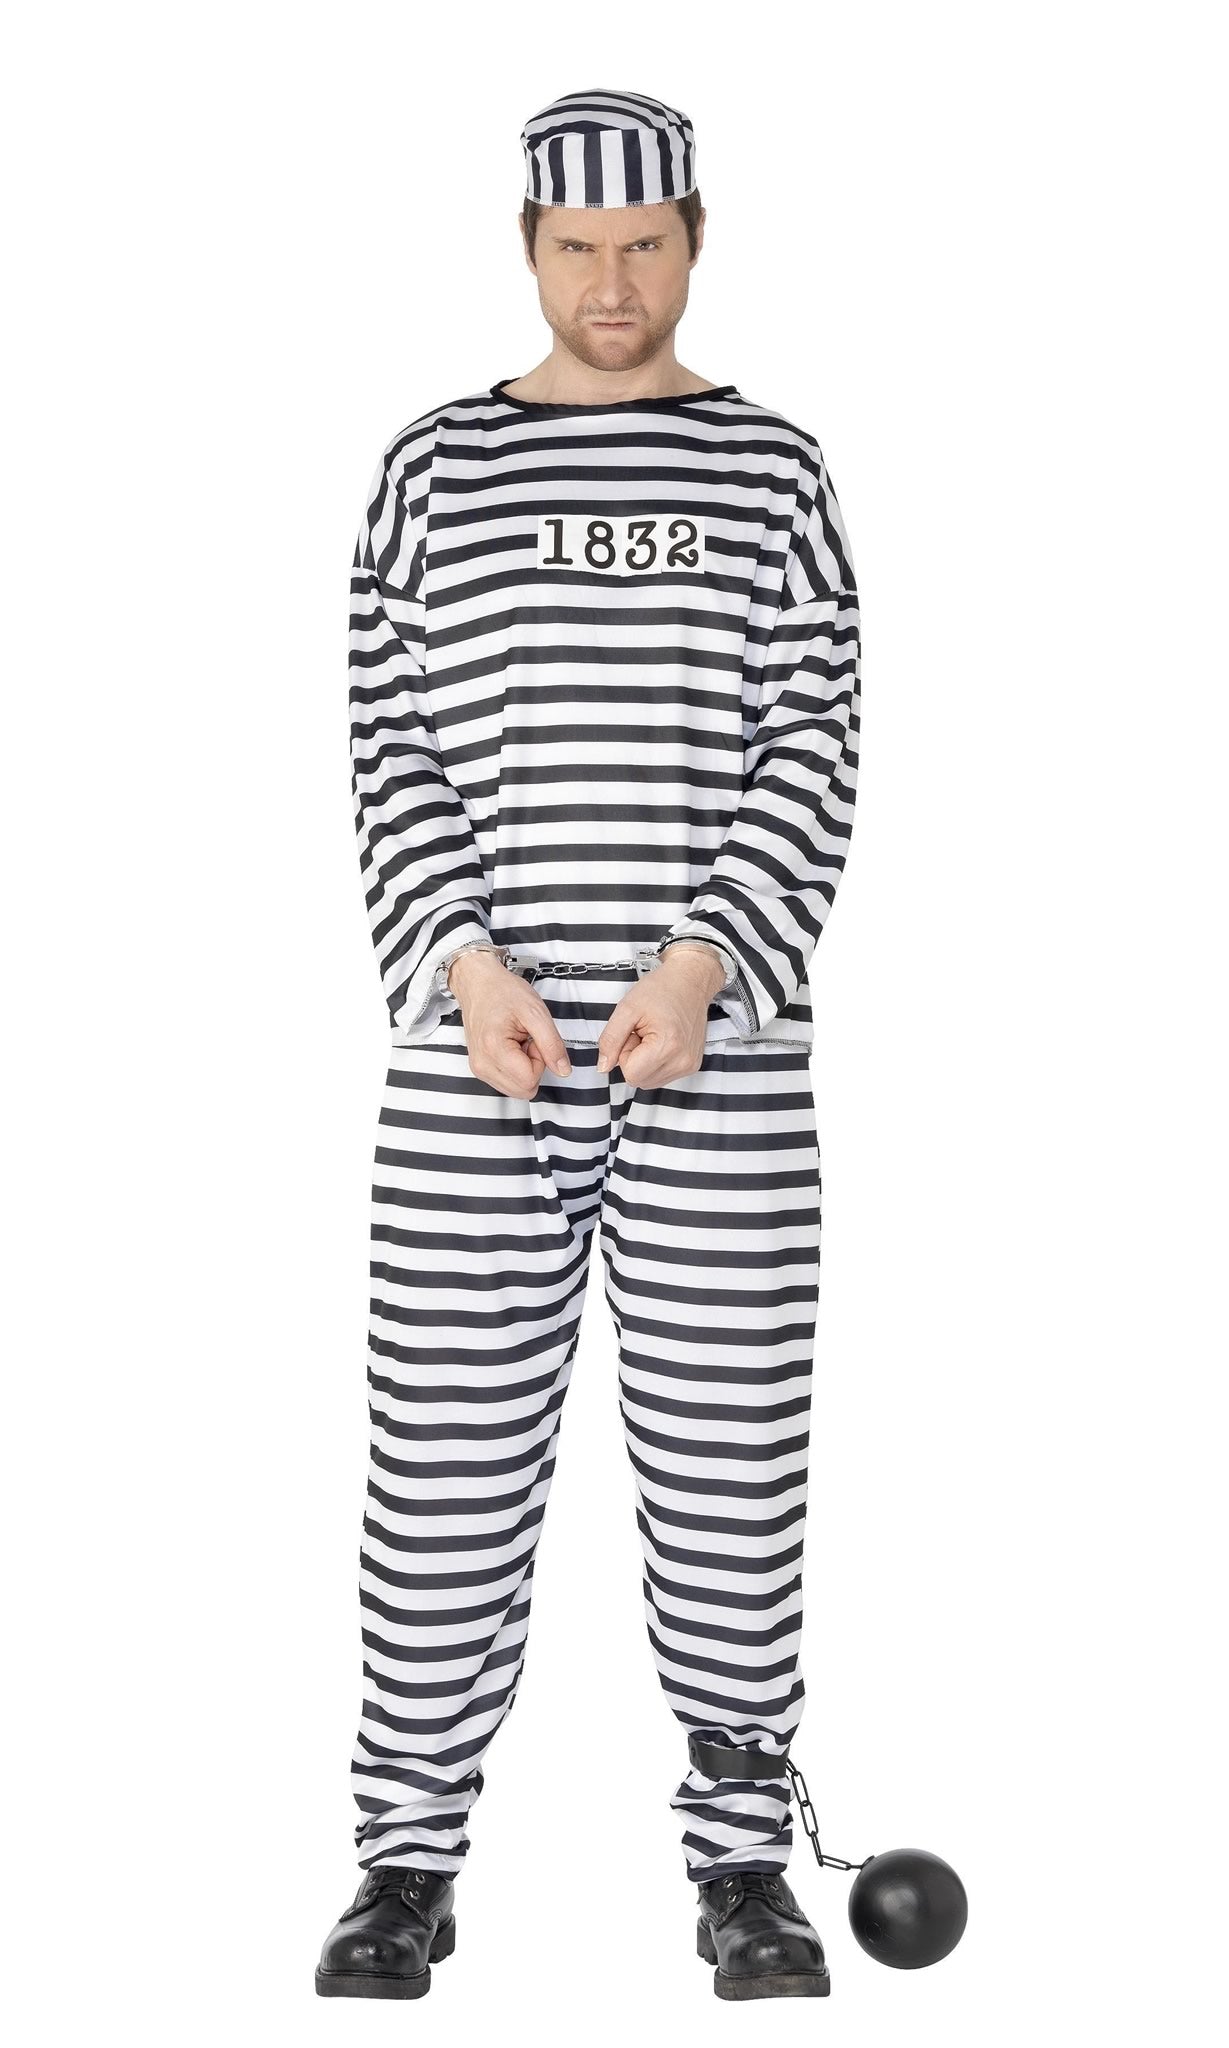 Black and white striped convict style prisoner costume with matching hat and number tag on chest